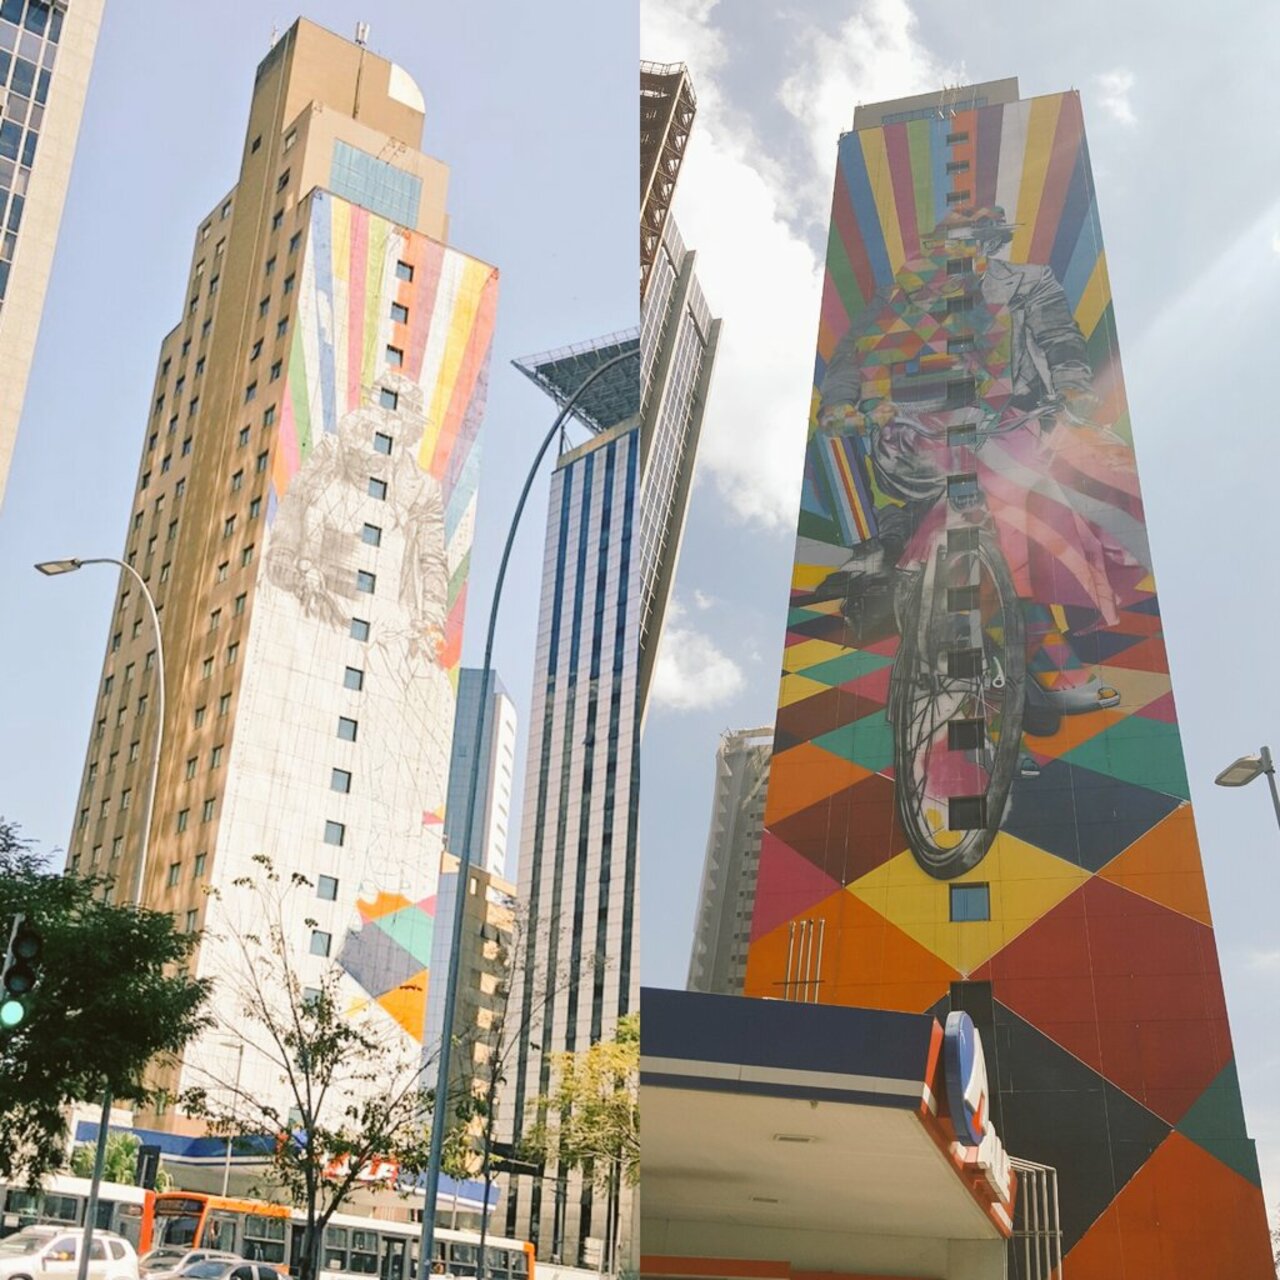 Look how quick they finished this piece, the one on the left was 2 days ago. #SaoPaulo #Brazil #StreetArt #Travel https://t.co/GsHMNuOvnT